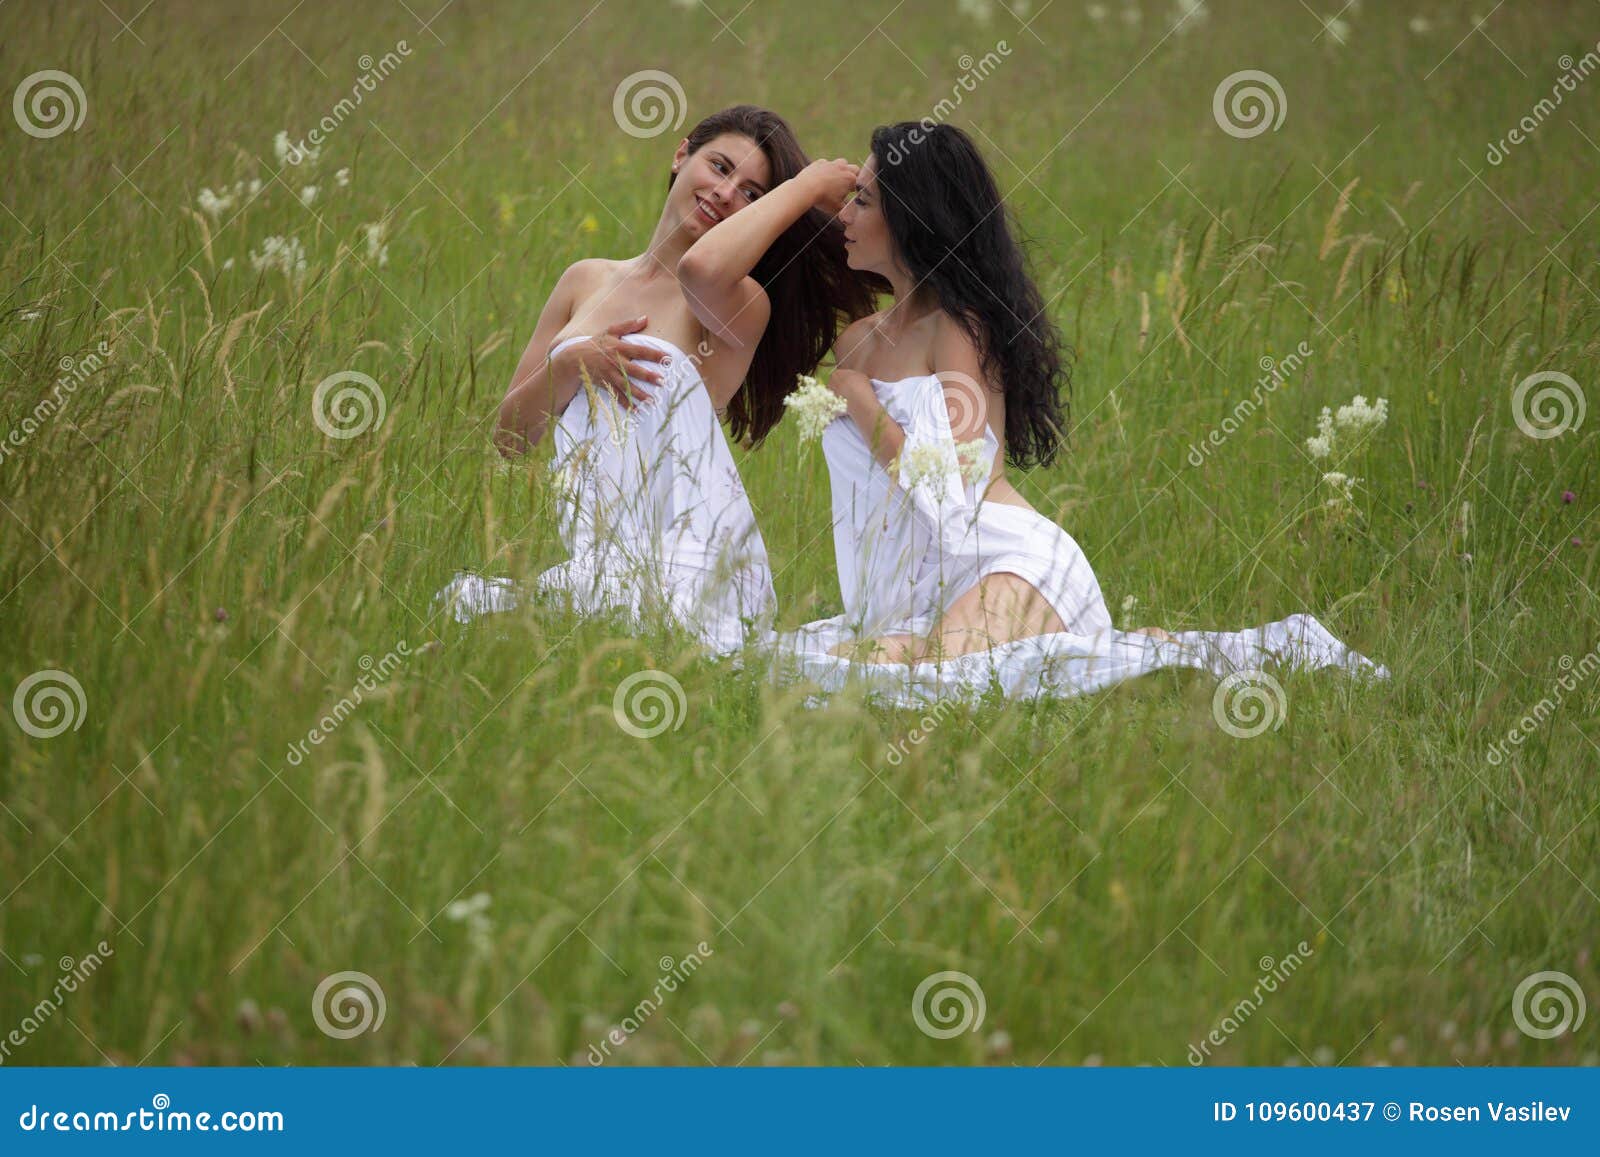 Portrait Two Woman Nature. Stock Image Image of outdoor, friendship: 109600437